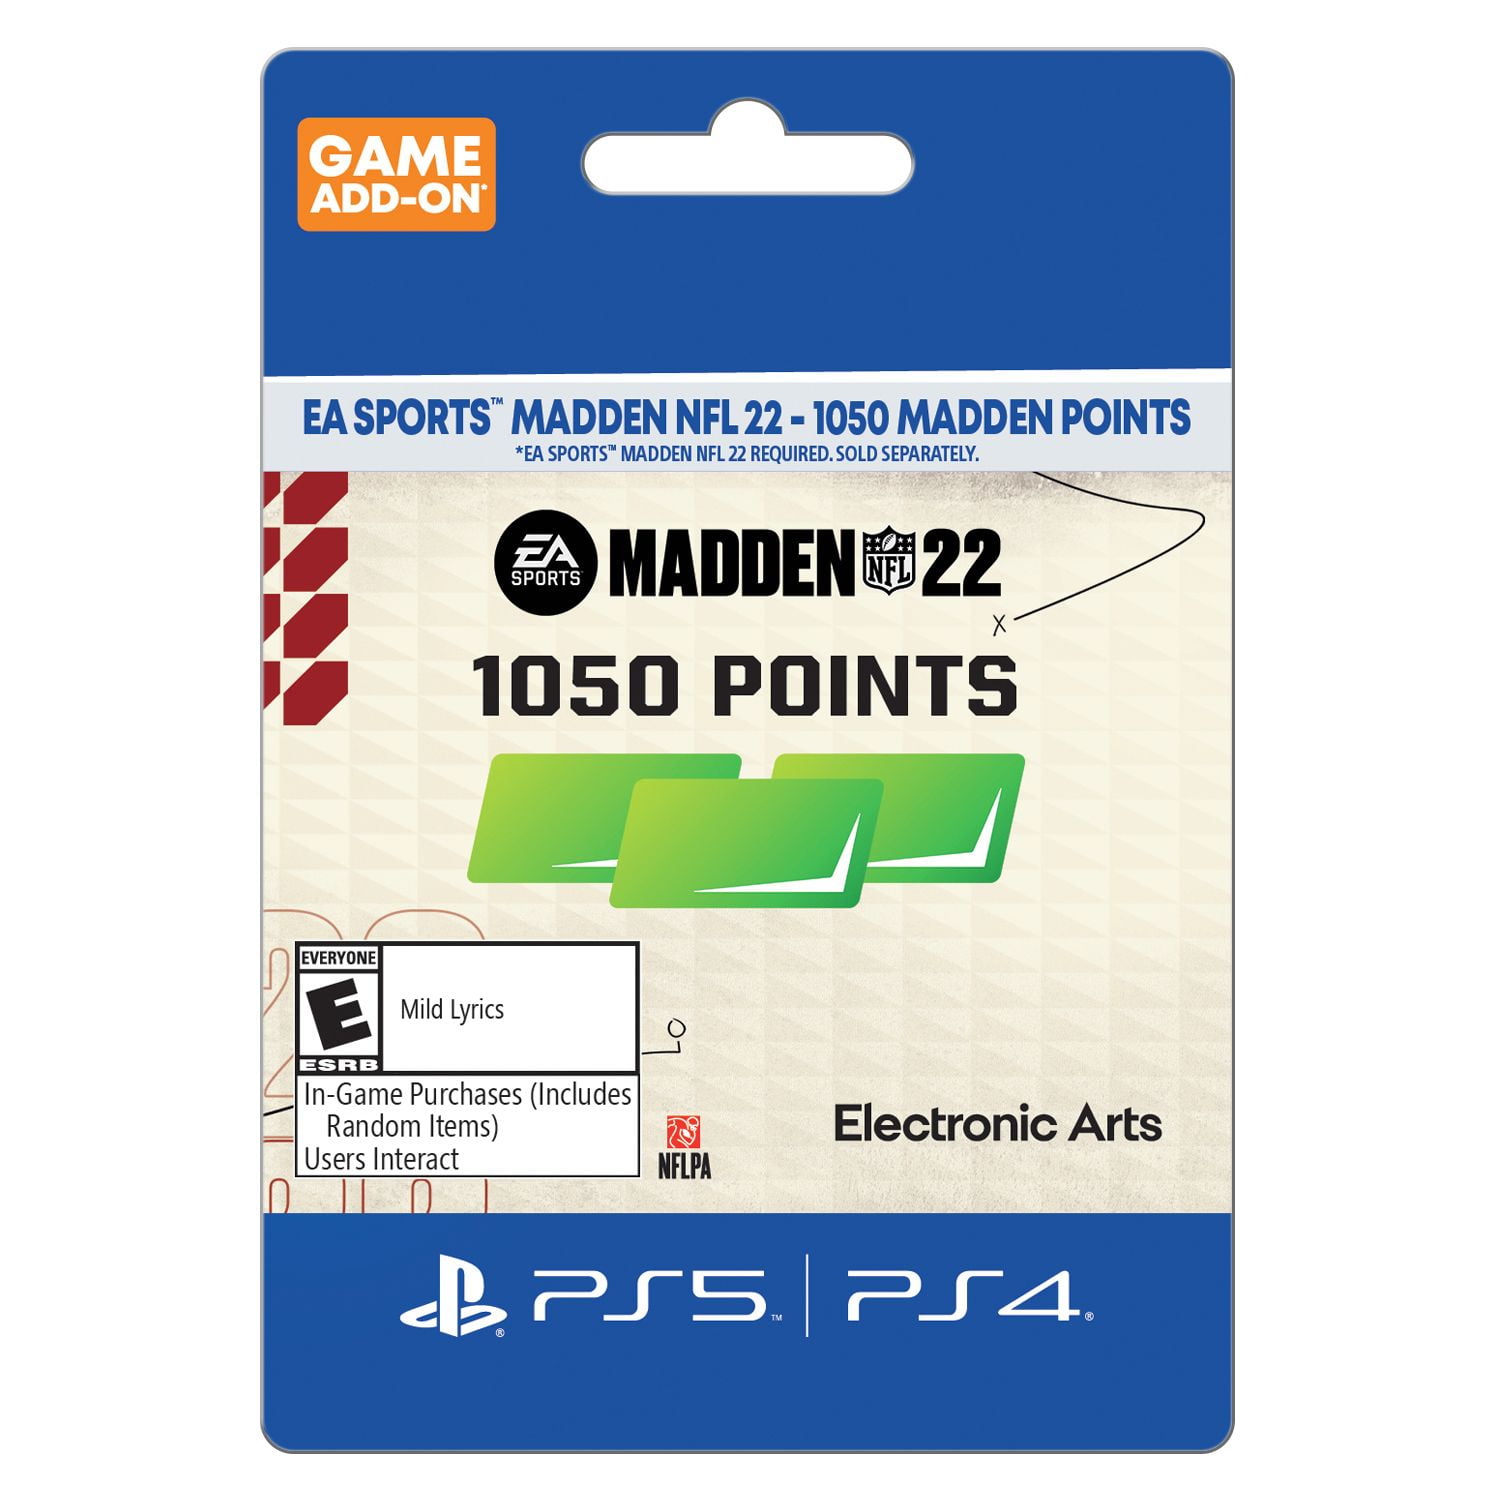 Electronic Arts Madden NFL 22 Game for PS4